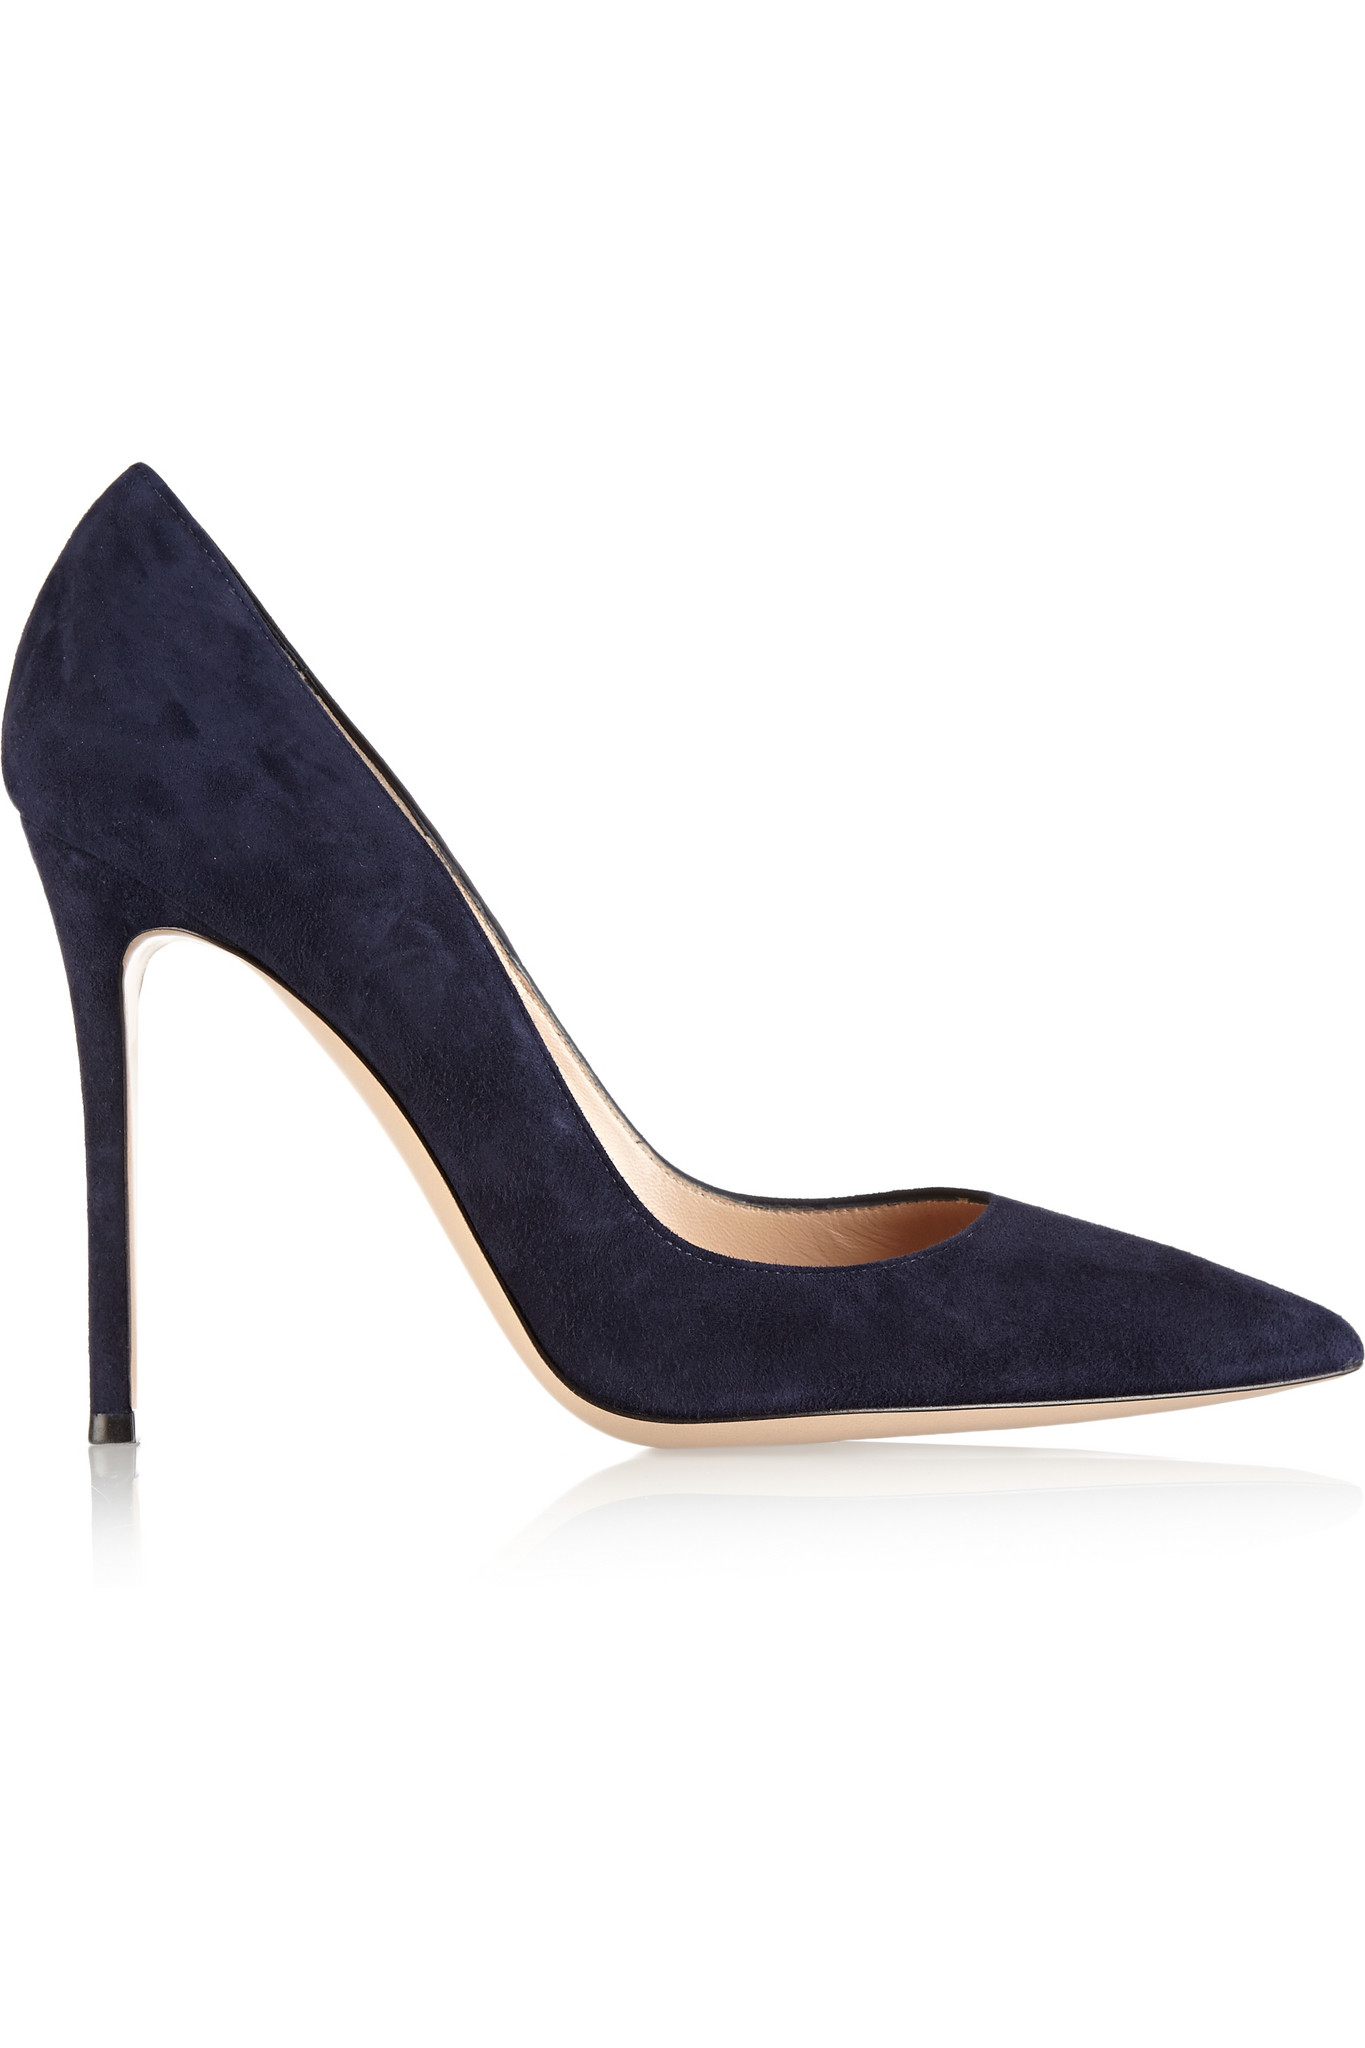 Gianvito rossi 100 Suede Pumps in Blue | Lyst